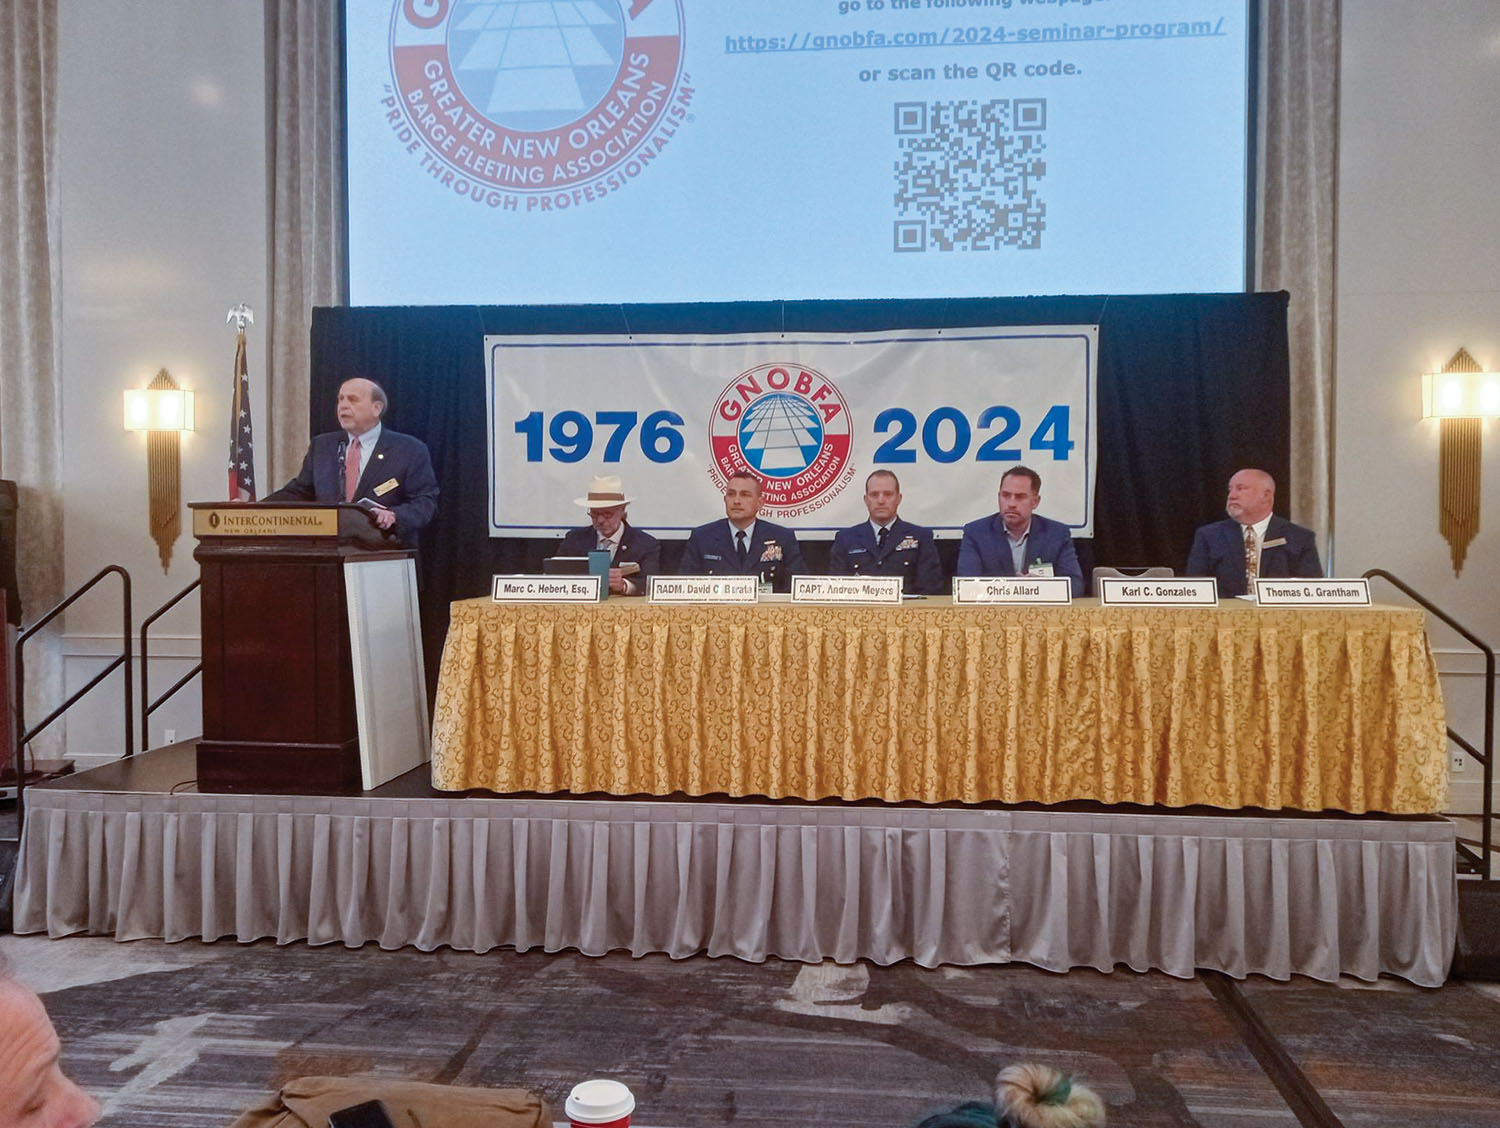 Karl Gonzalez welcomes attendees to the 40th Annual seminar of the Greater New Orleans Barge Fleeting Association in New Orleans on April 24. (Photo by David Murray)